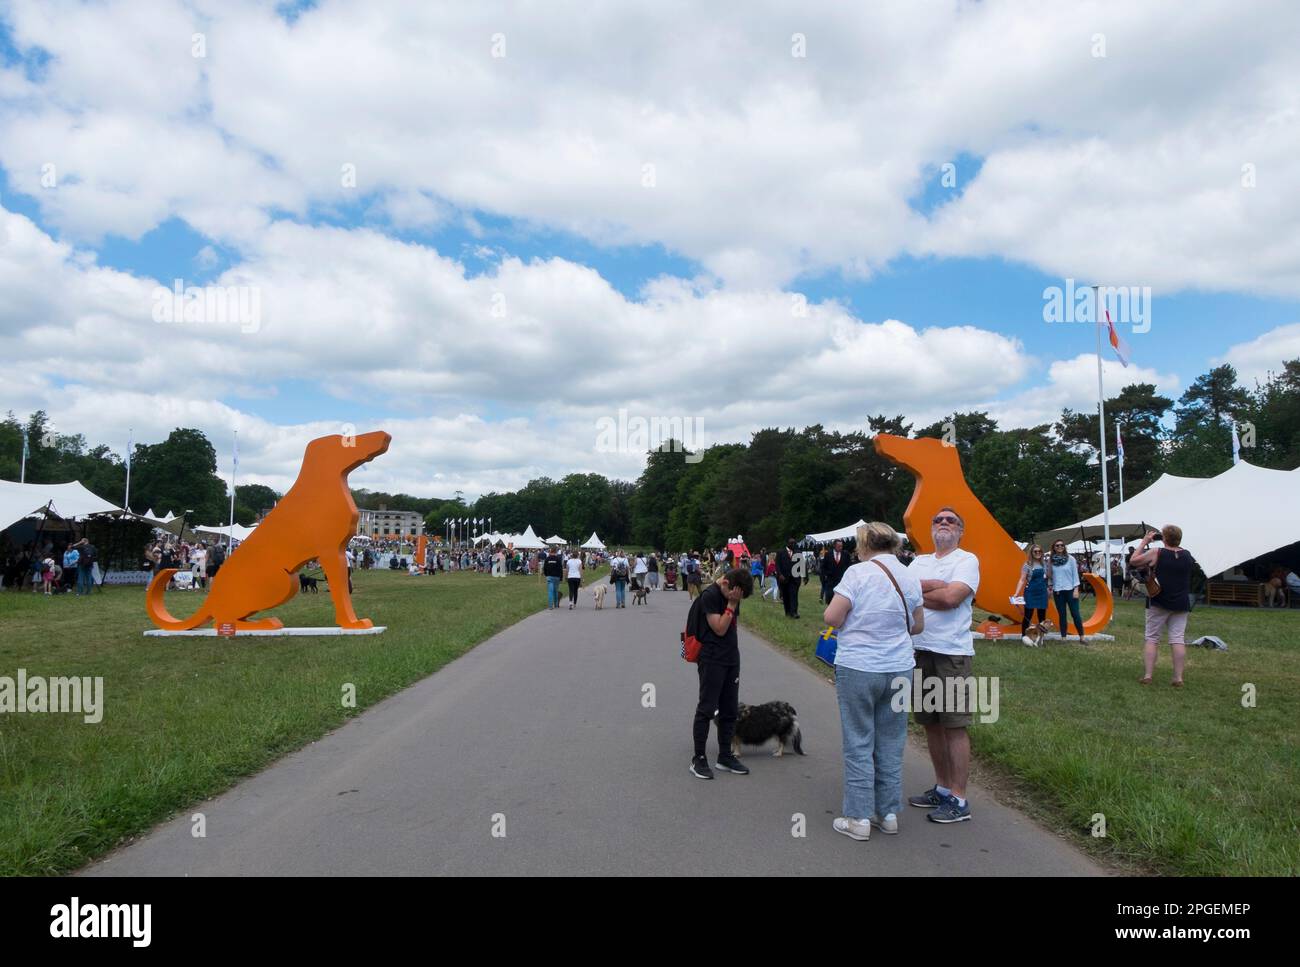 People standing next to the entrance of two orange, wooden silhouettes of hounds at Goodwoof, at The Kennels, Goodwood, West Sussex, UK Stock Photo